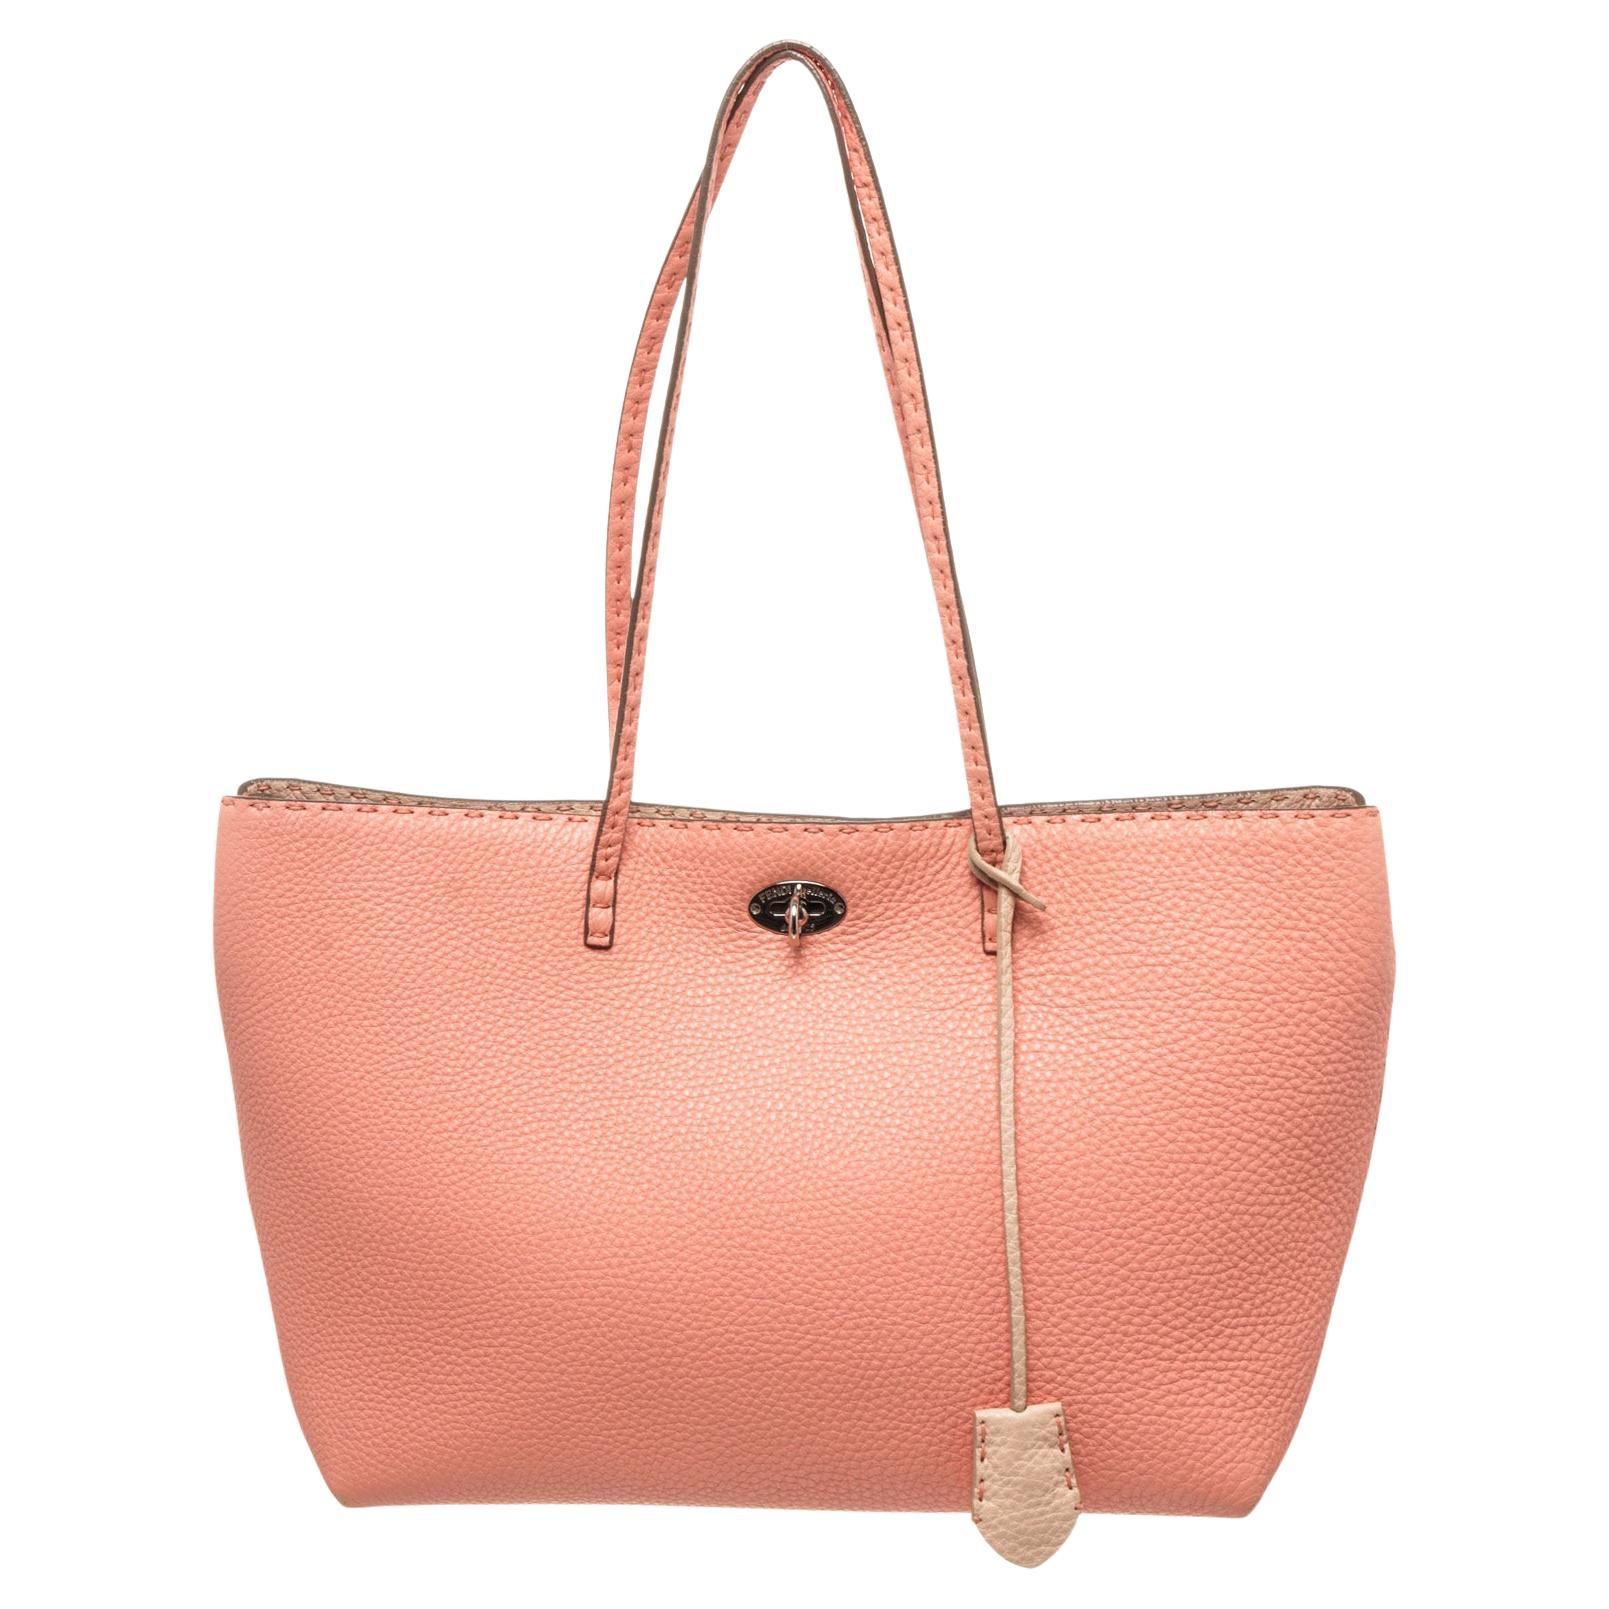 Fendi Pink Leather Selleria Tote Bag For Sale